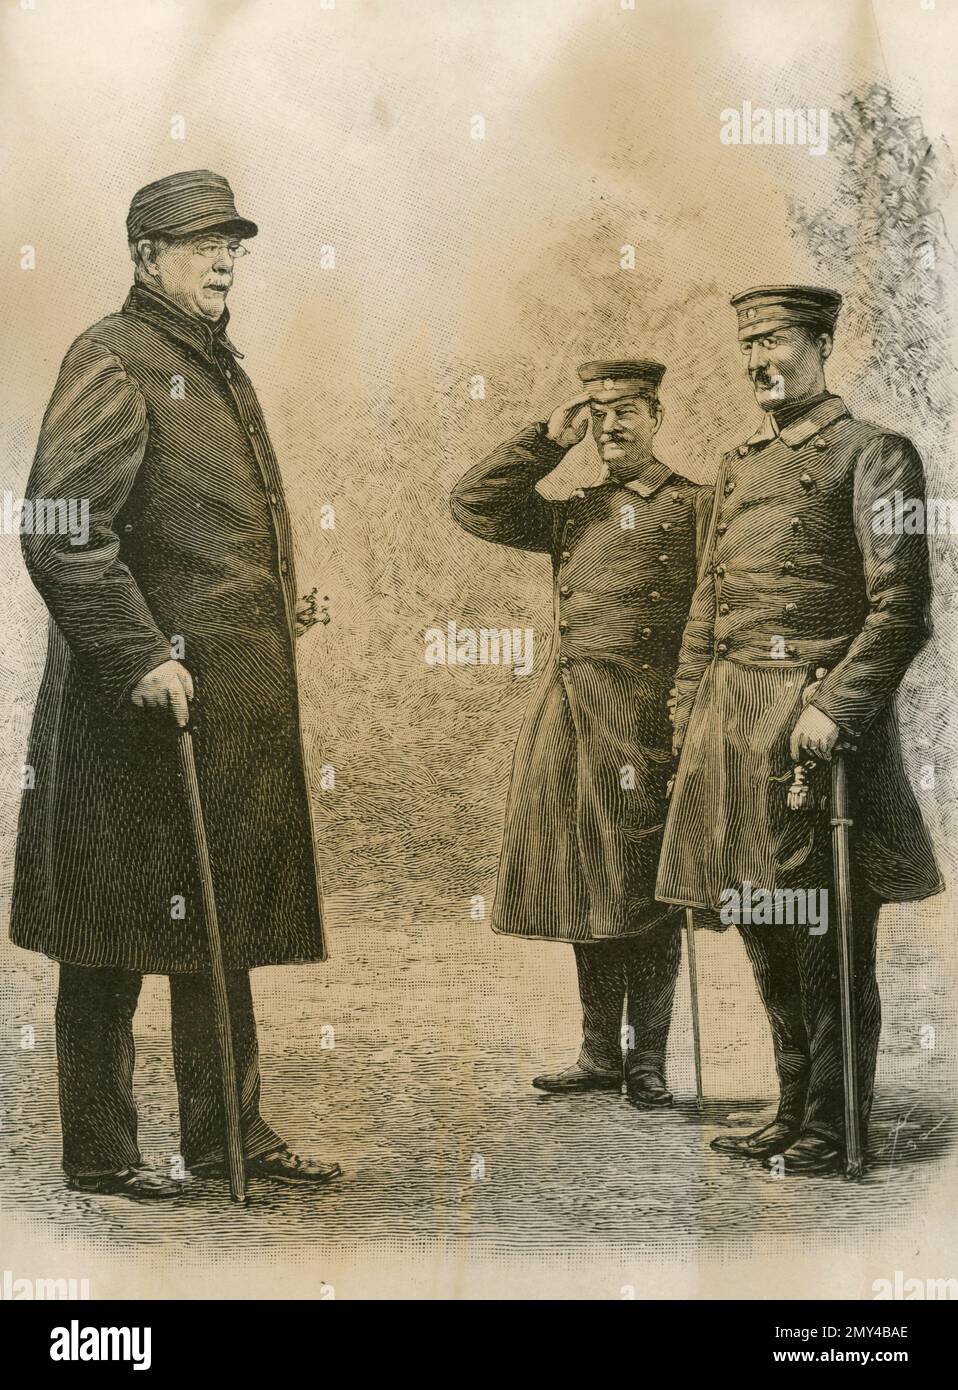 German statesman and diplomat Otto von Bismarck greeted by gamekeepers during one of his walks, illustration 1870s Stock Photo